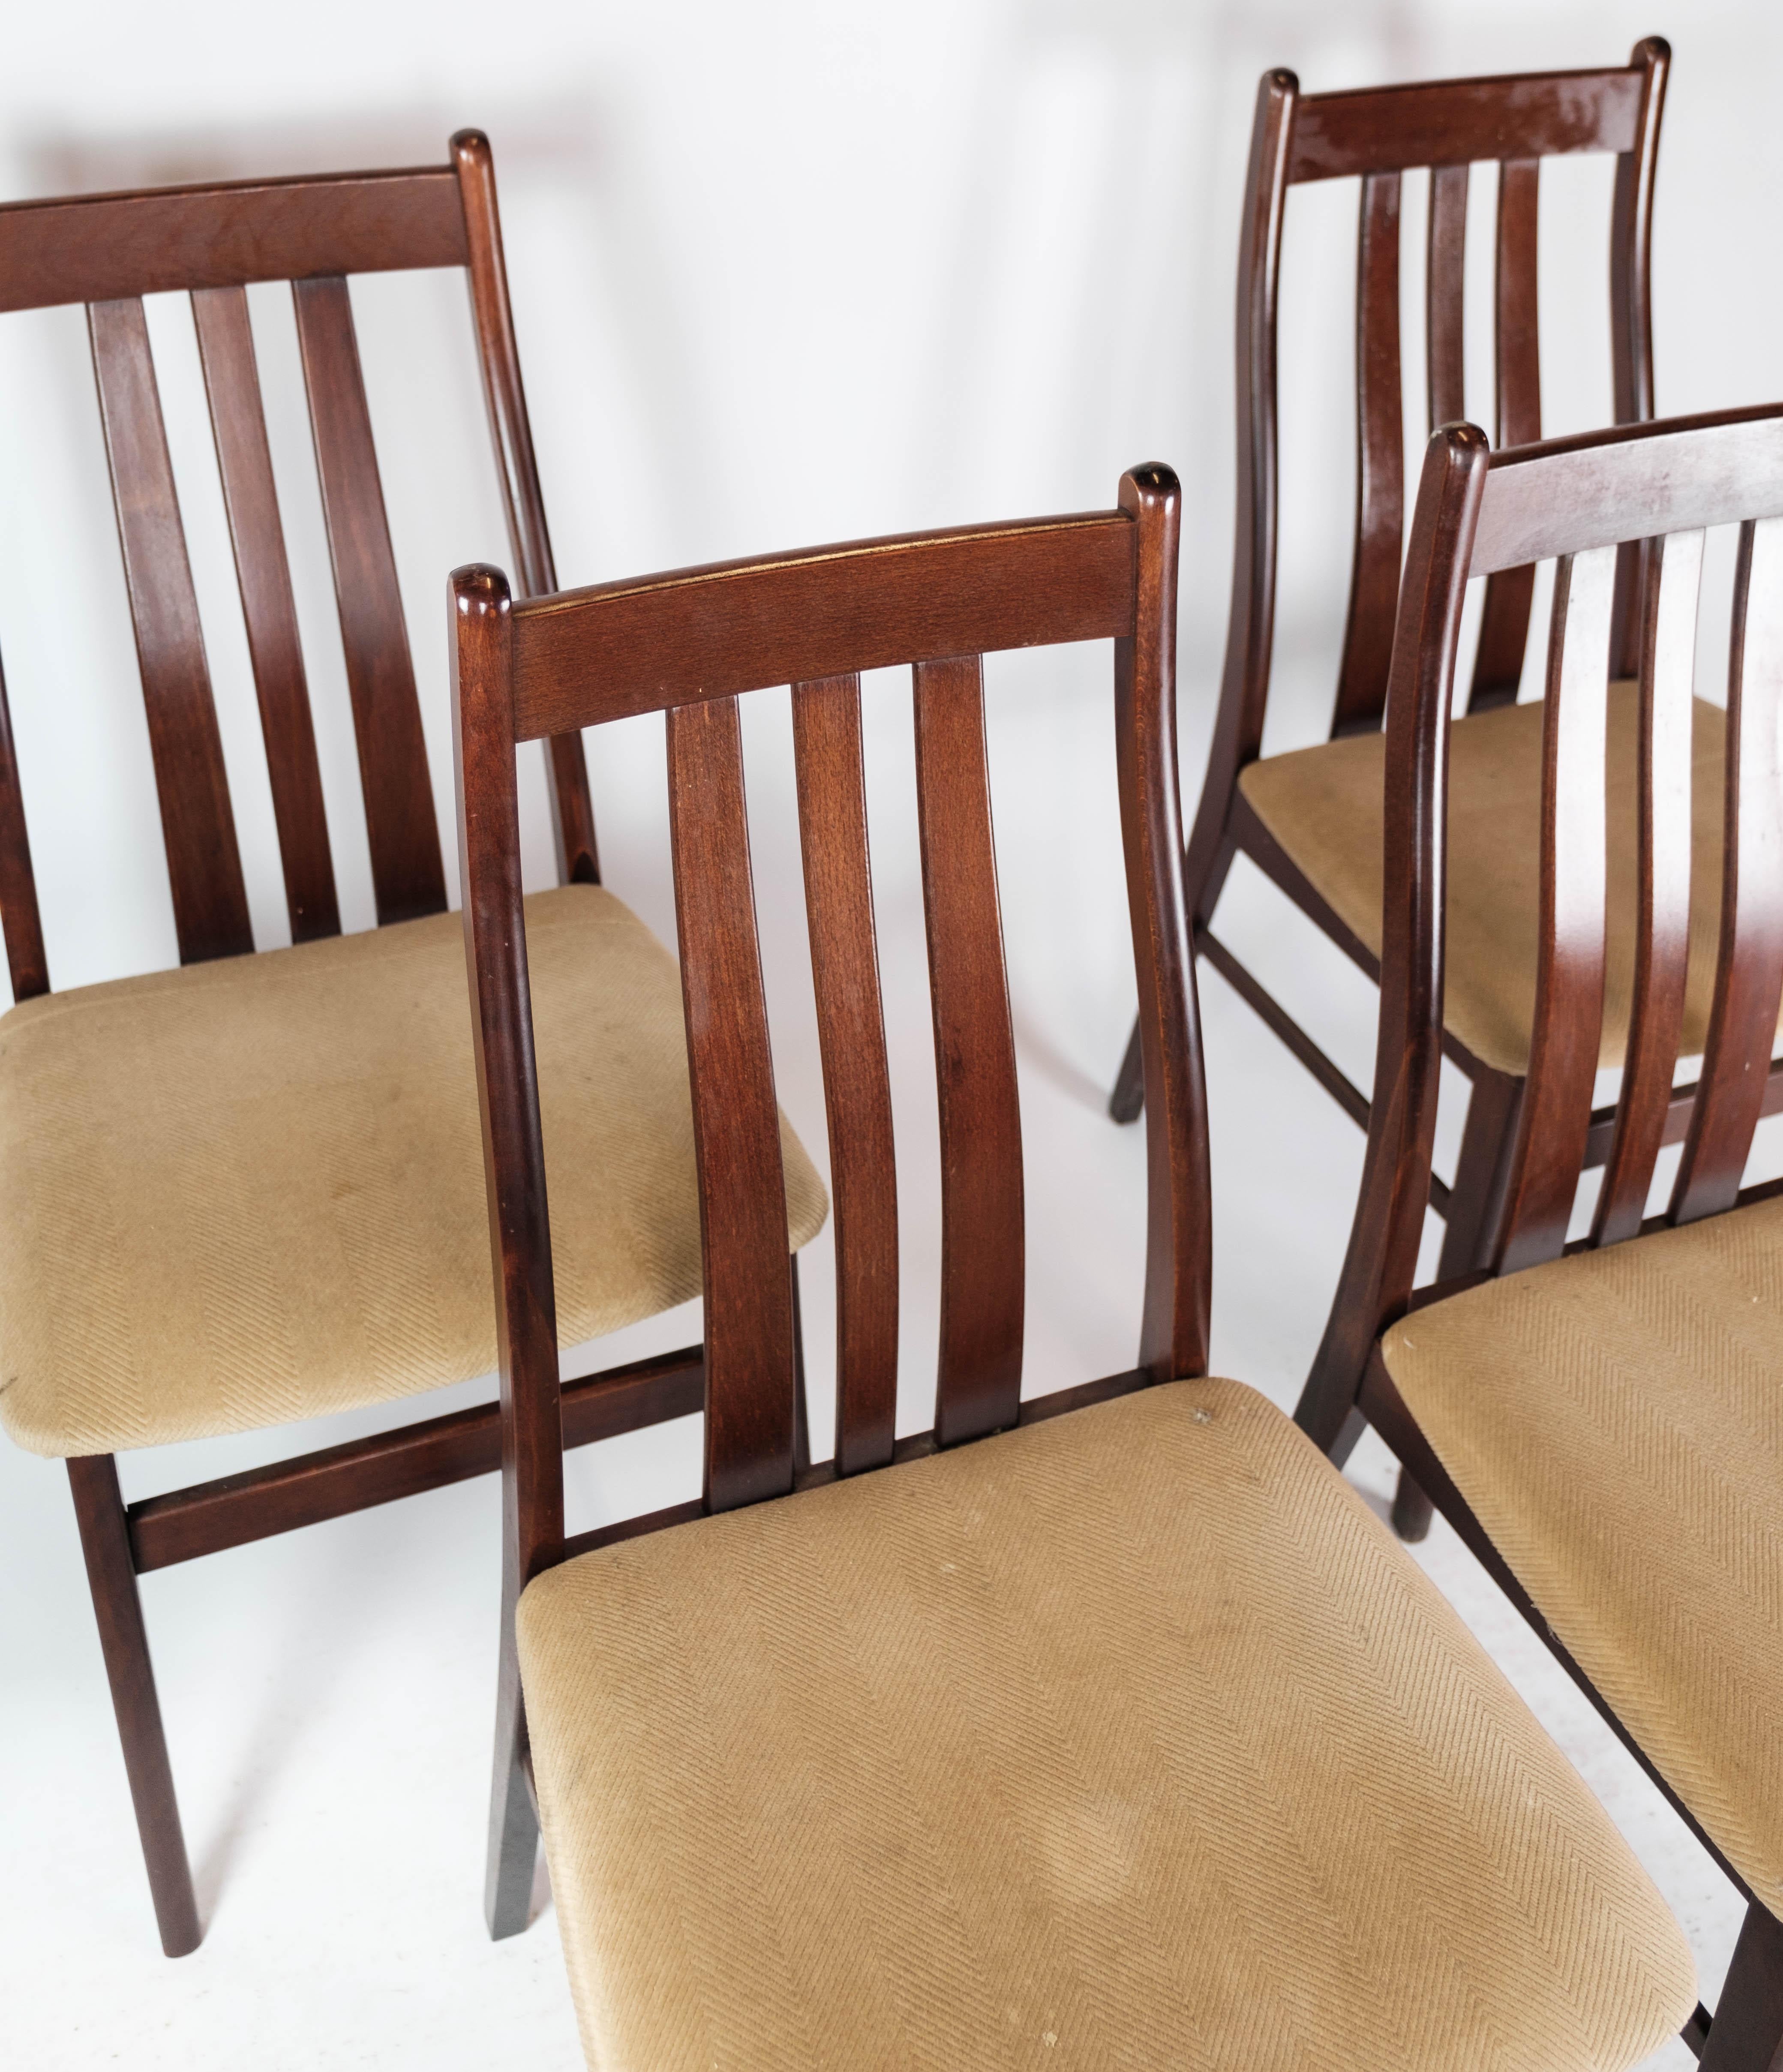 Danish Set of Four Dining Room Chairs Made In Mahogany By Farstrup From 1960s For Sale